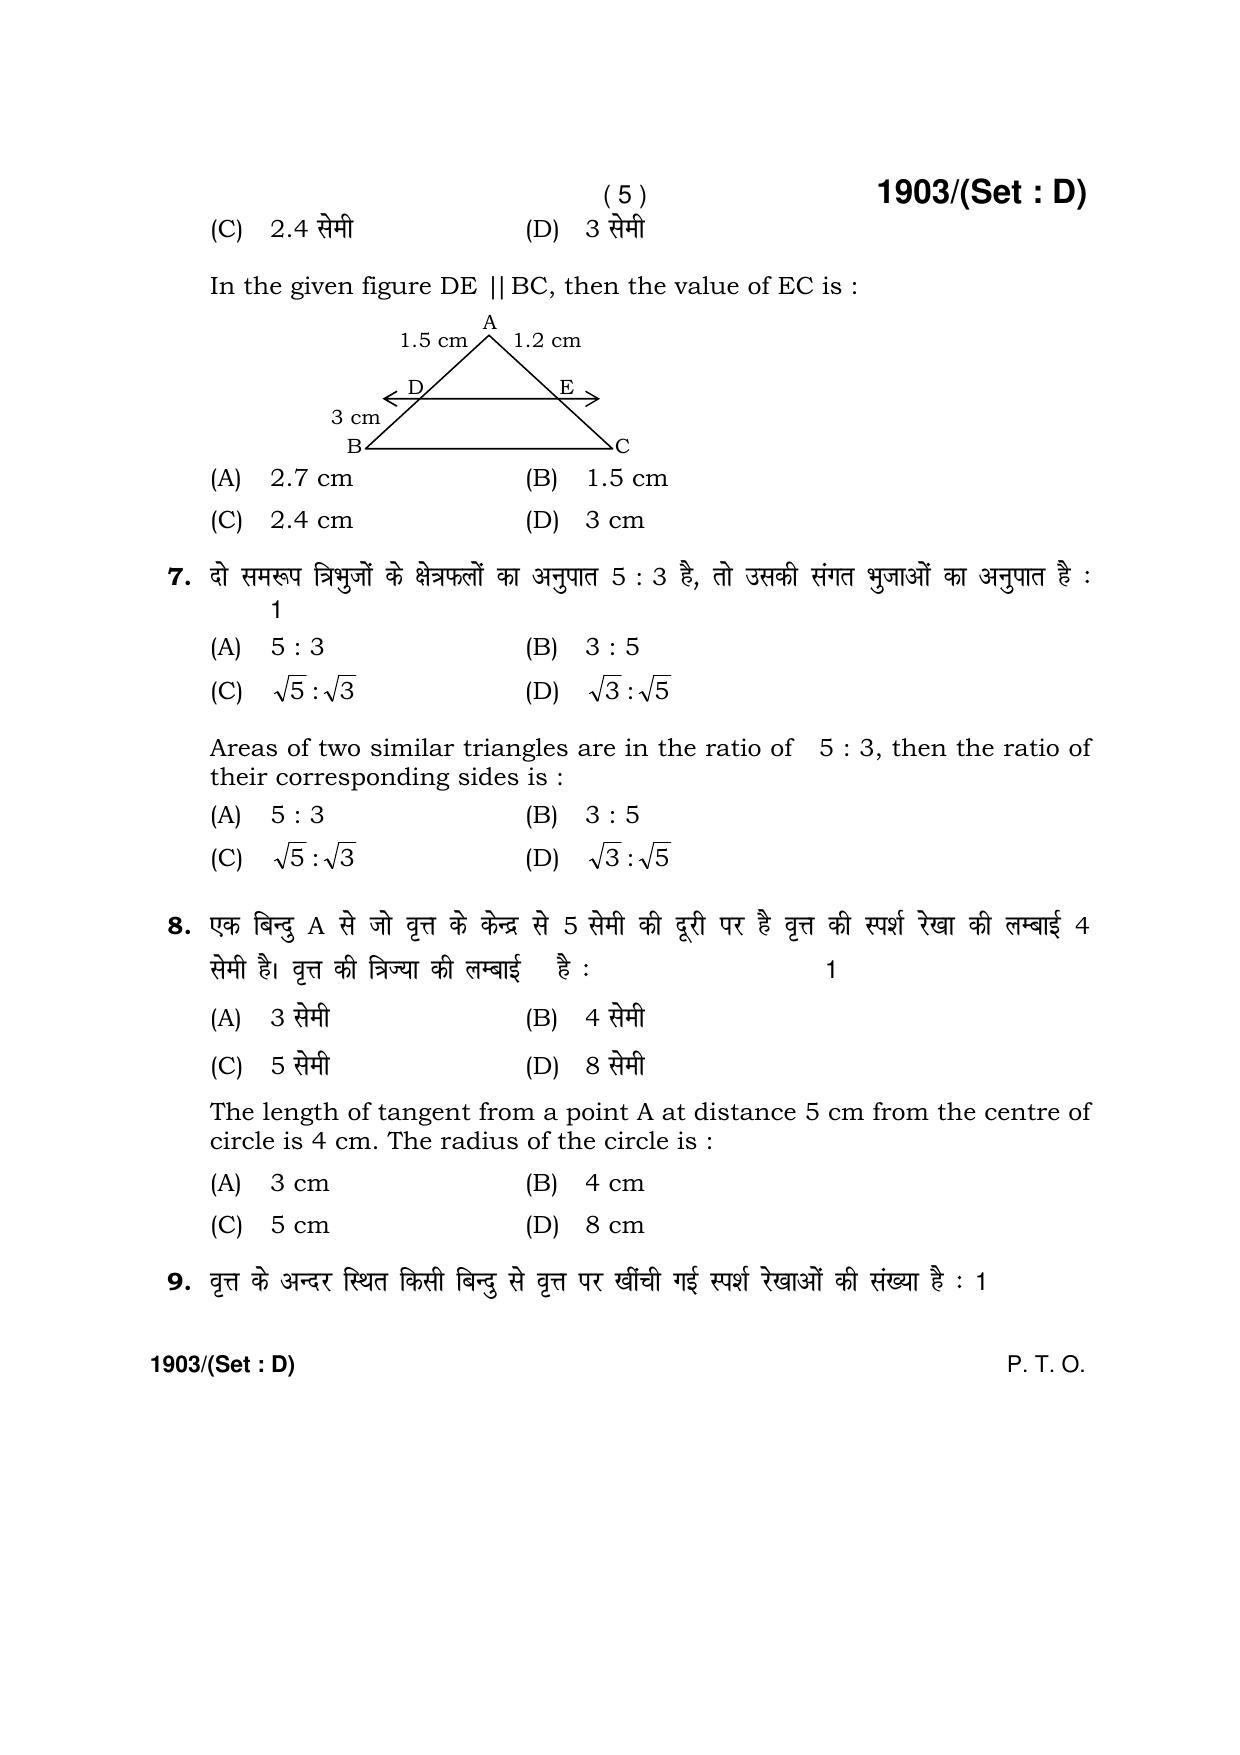 Haryana Board HBSE Class 10 Mathematics -D 2017 Question Paper - Page 5